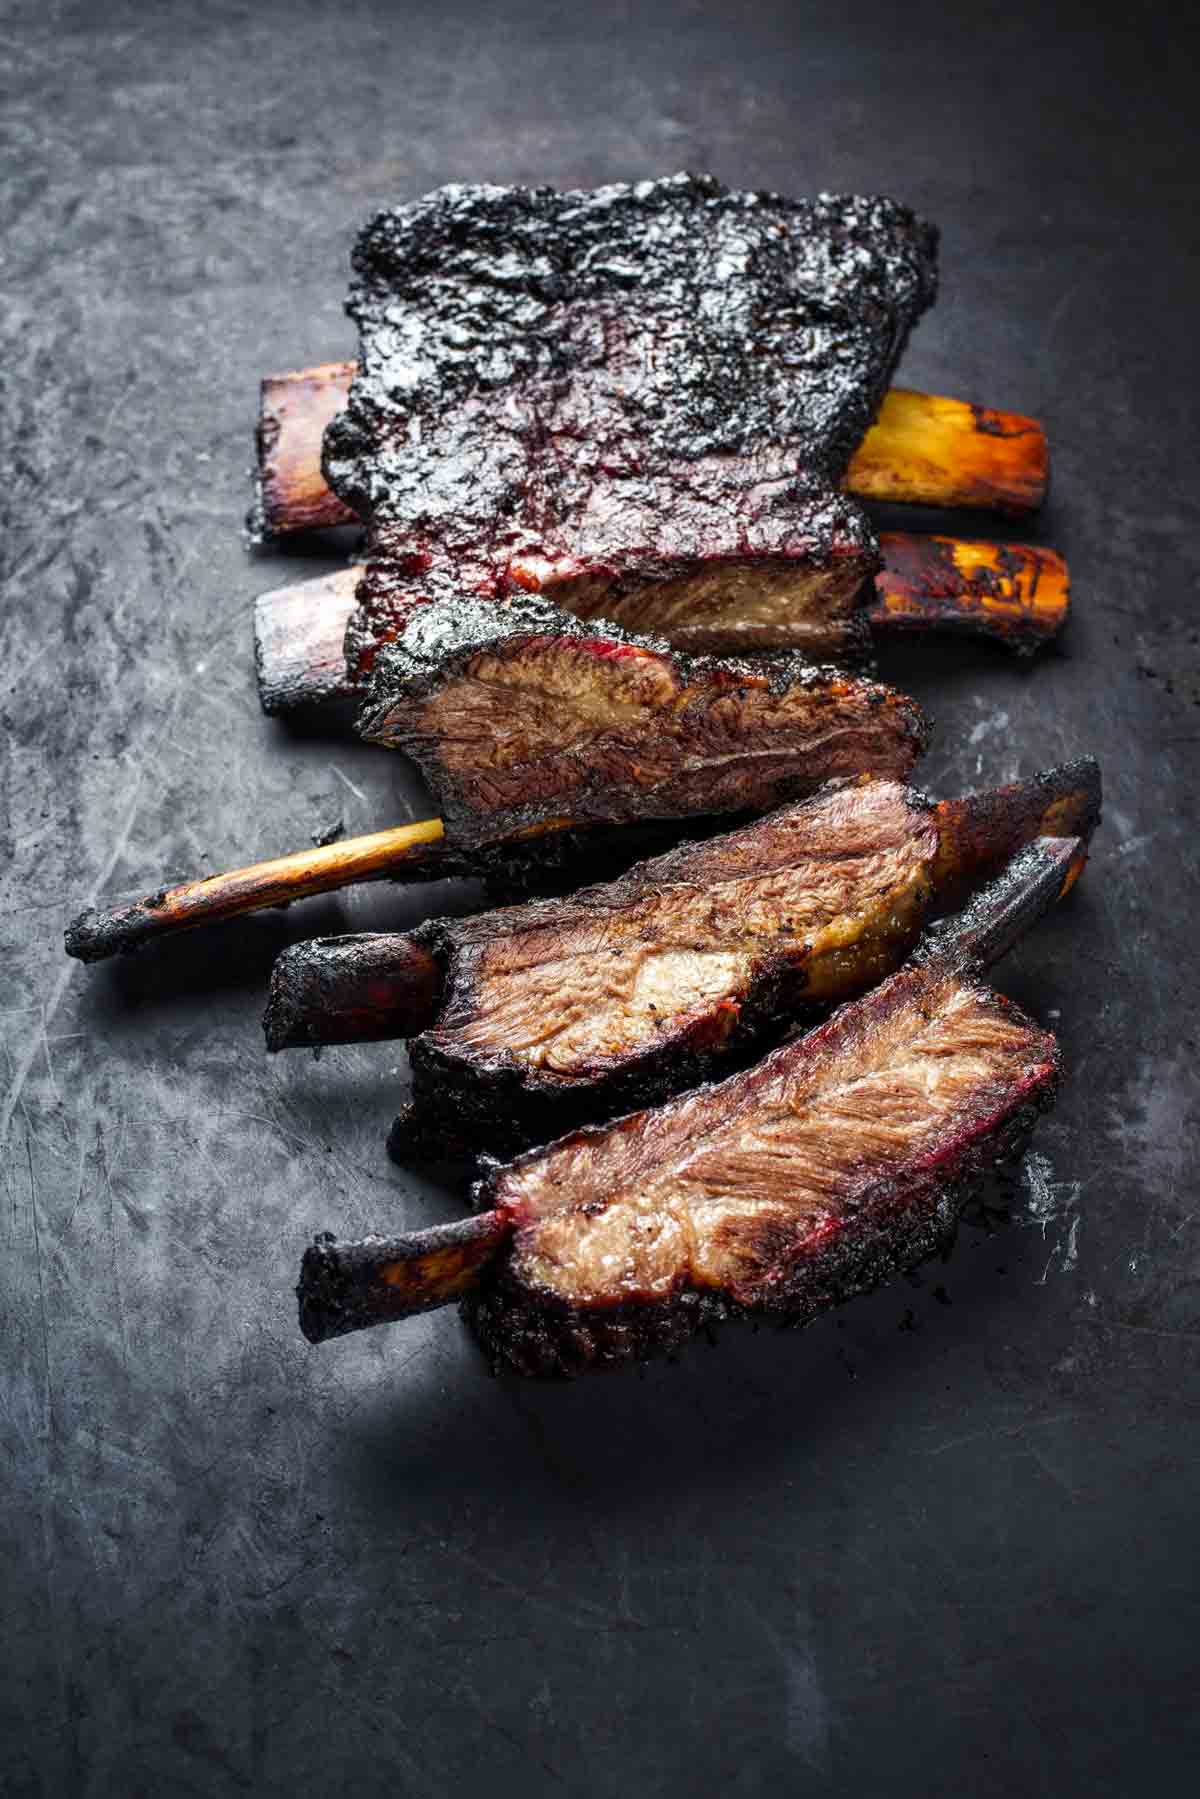 A slab of barbecued beef back ribs cut into individual ribs.